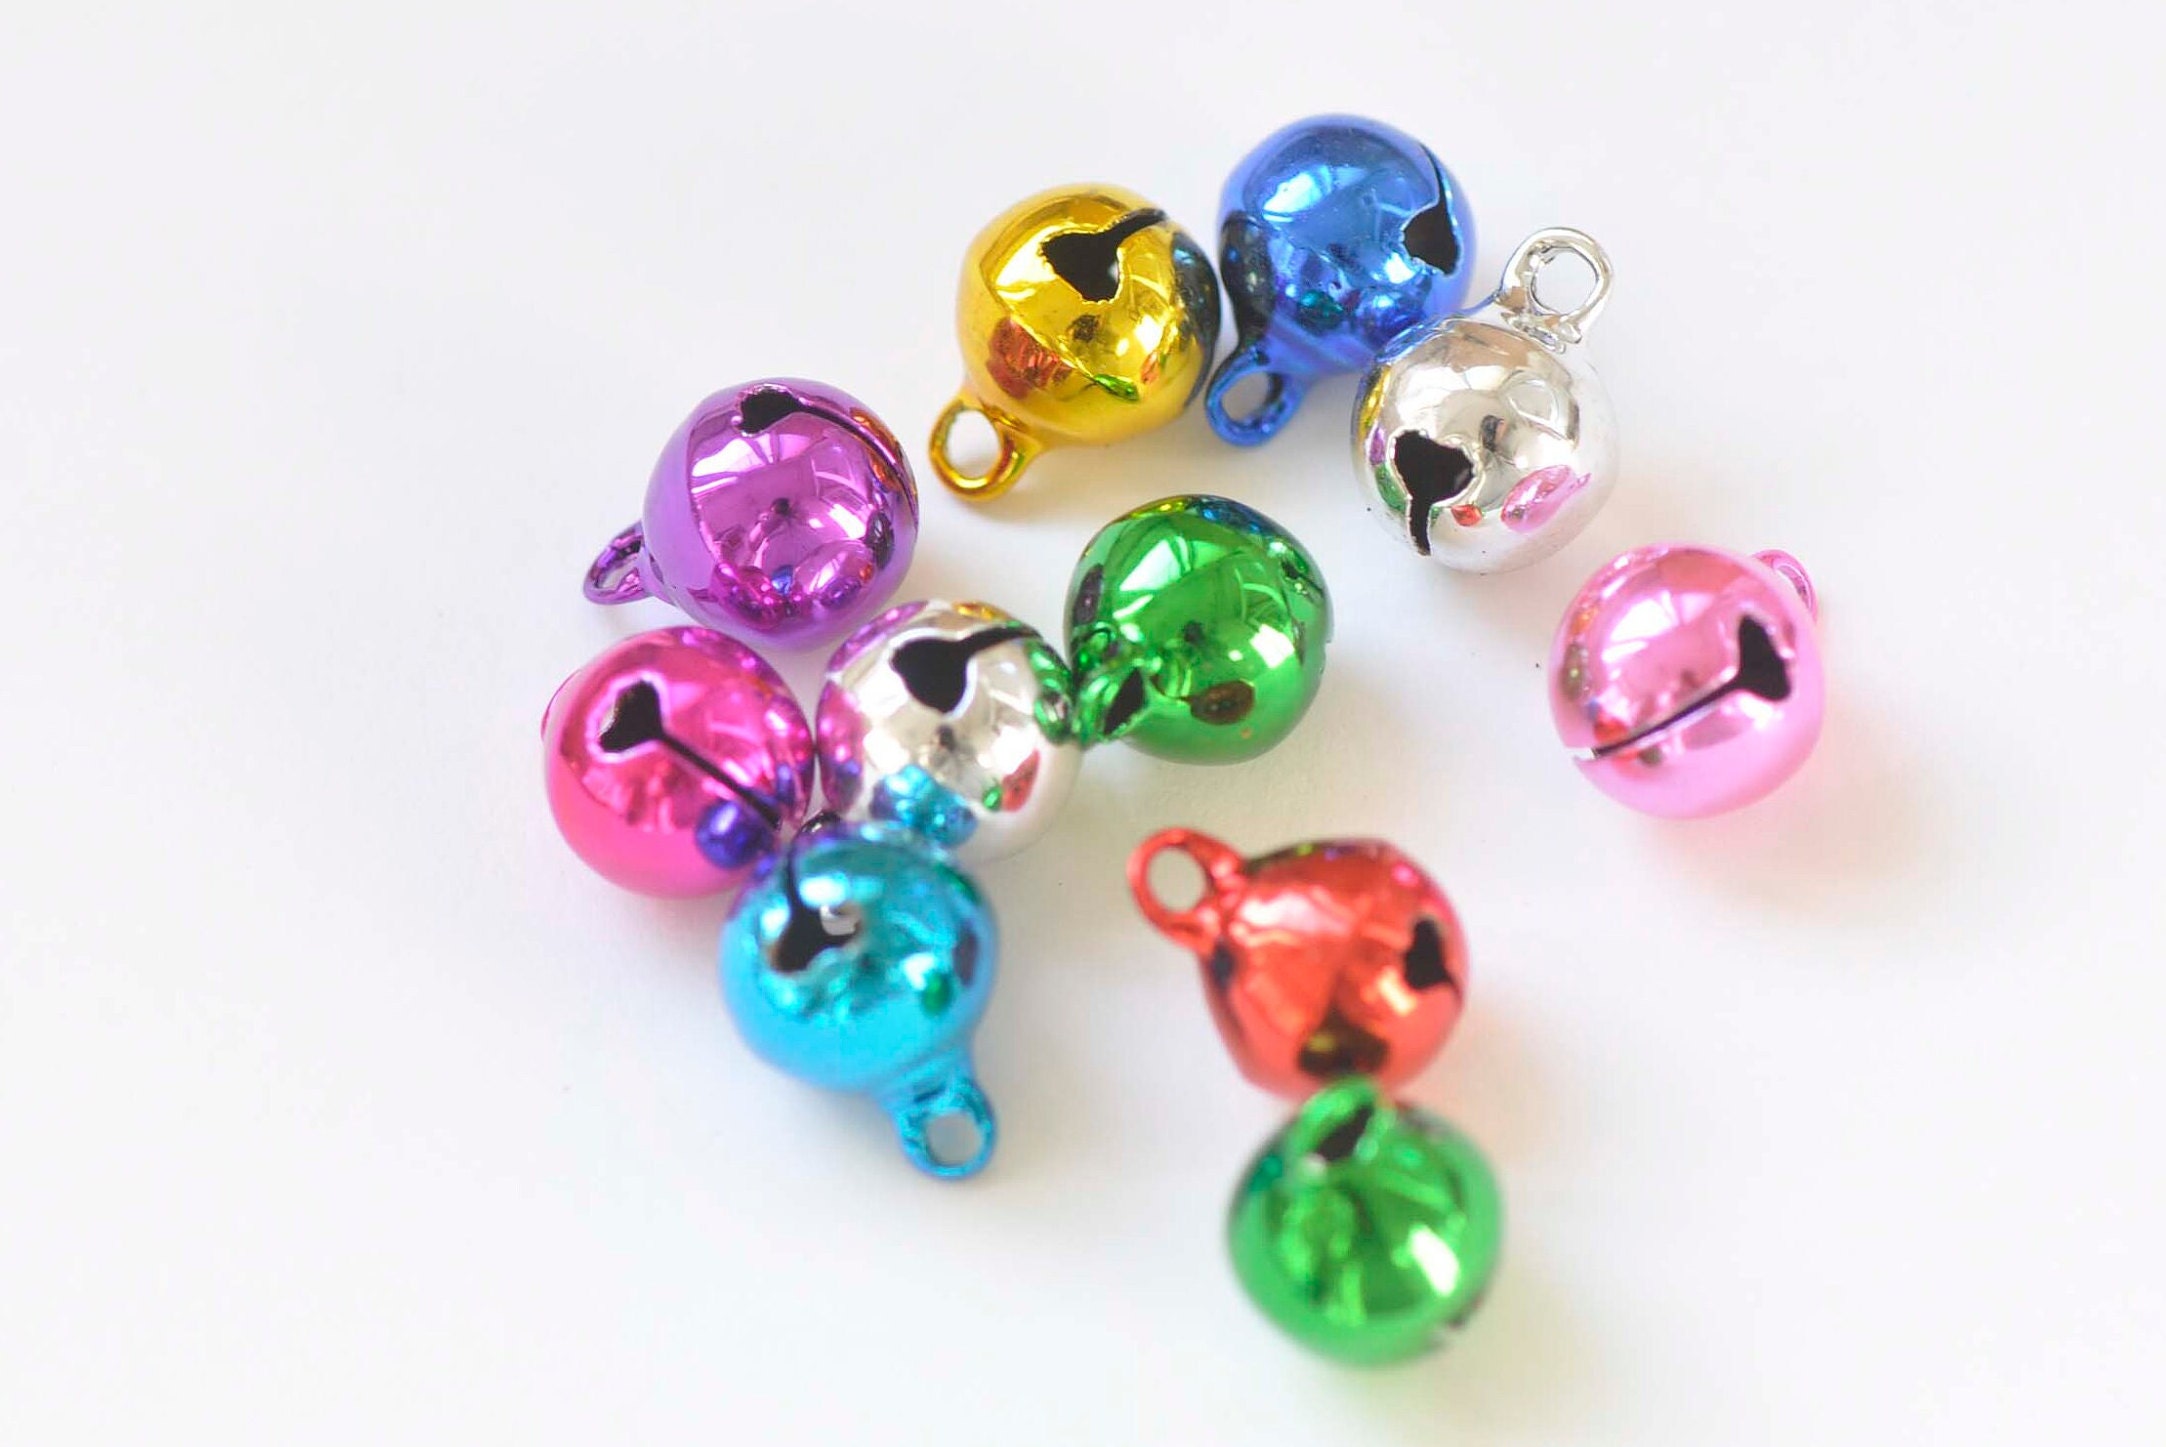 Colored Jingle Bells for Crafting Holiday Decorating Gift 